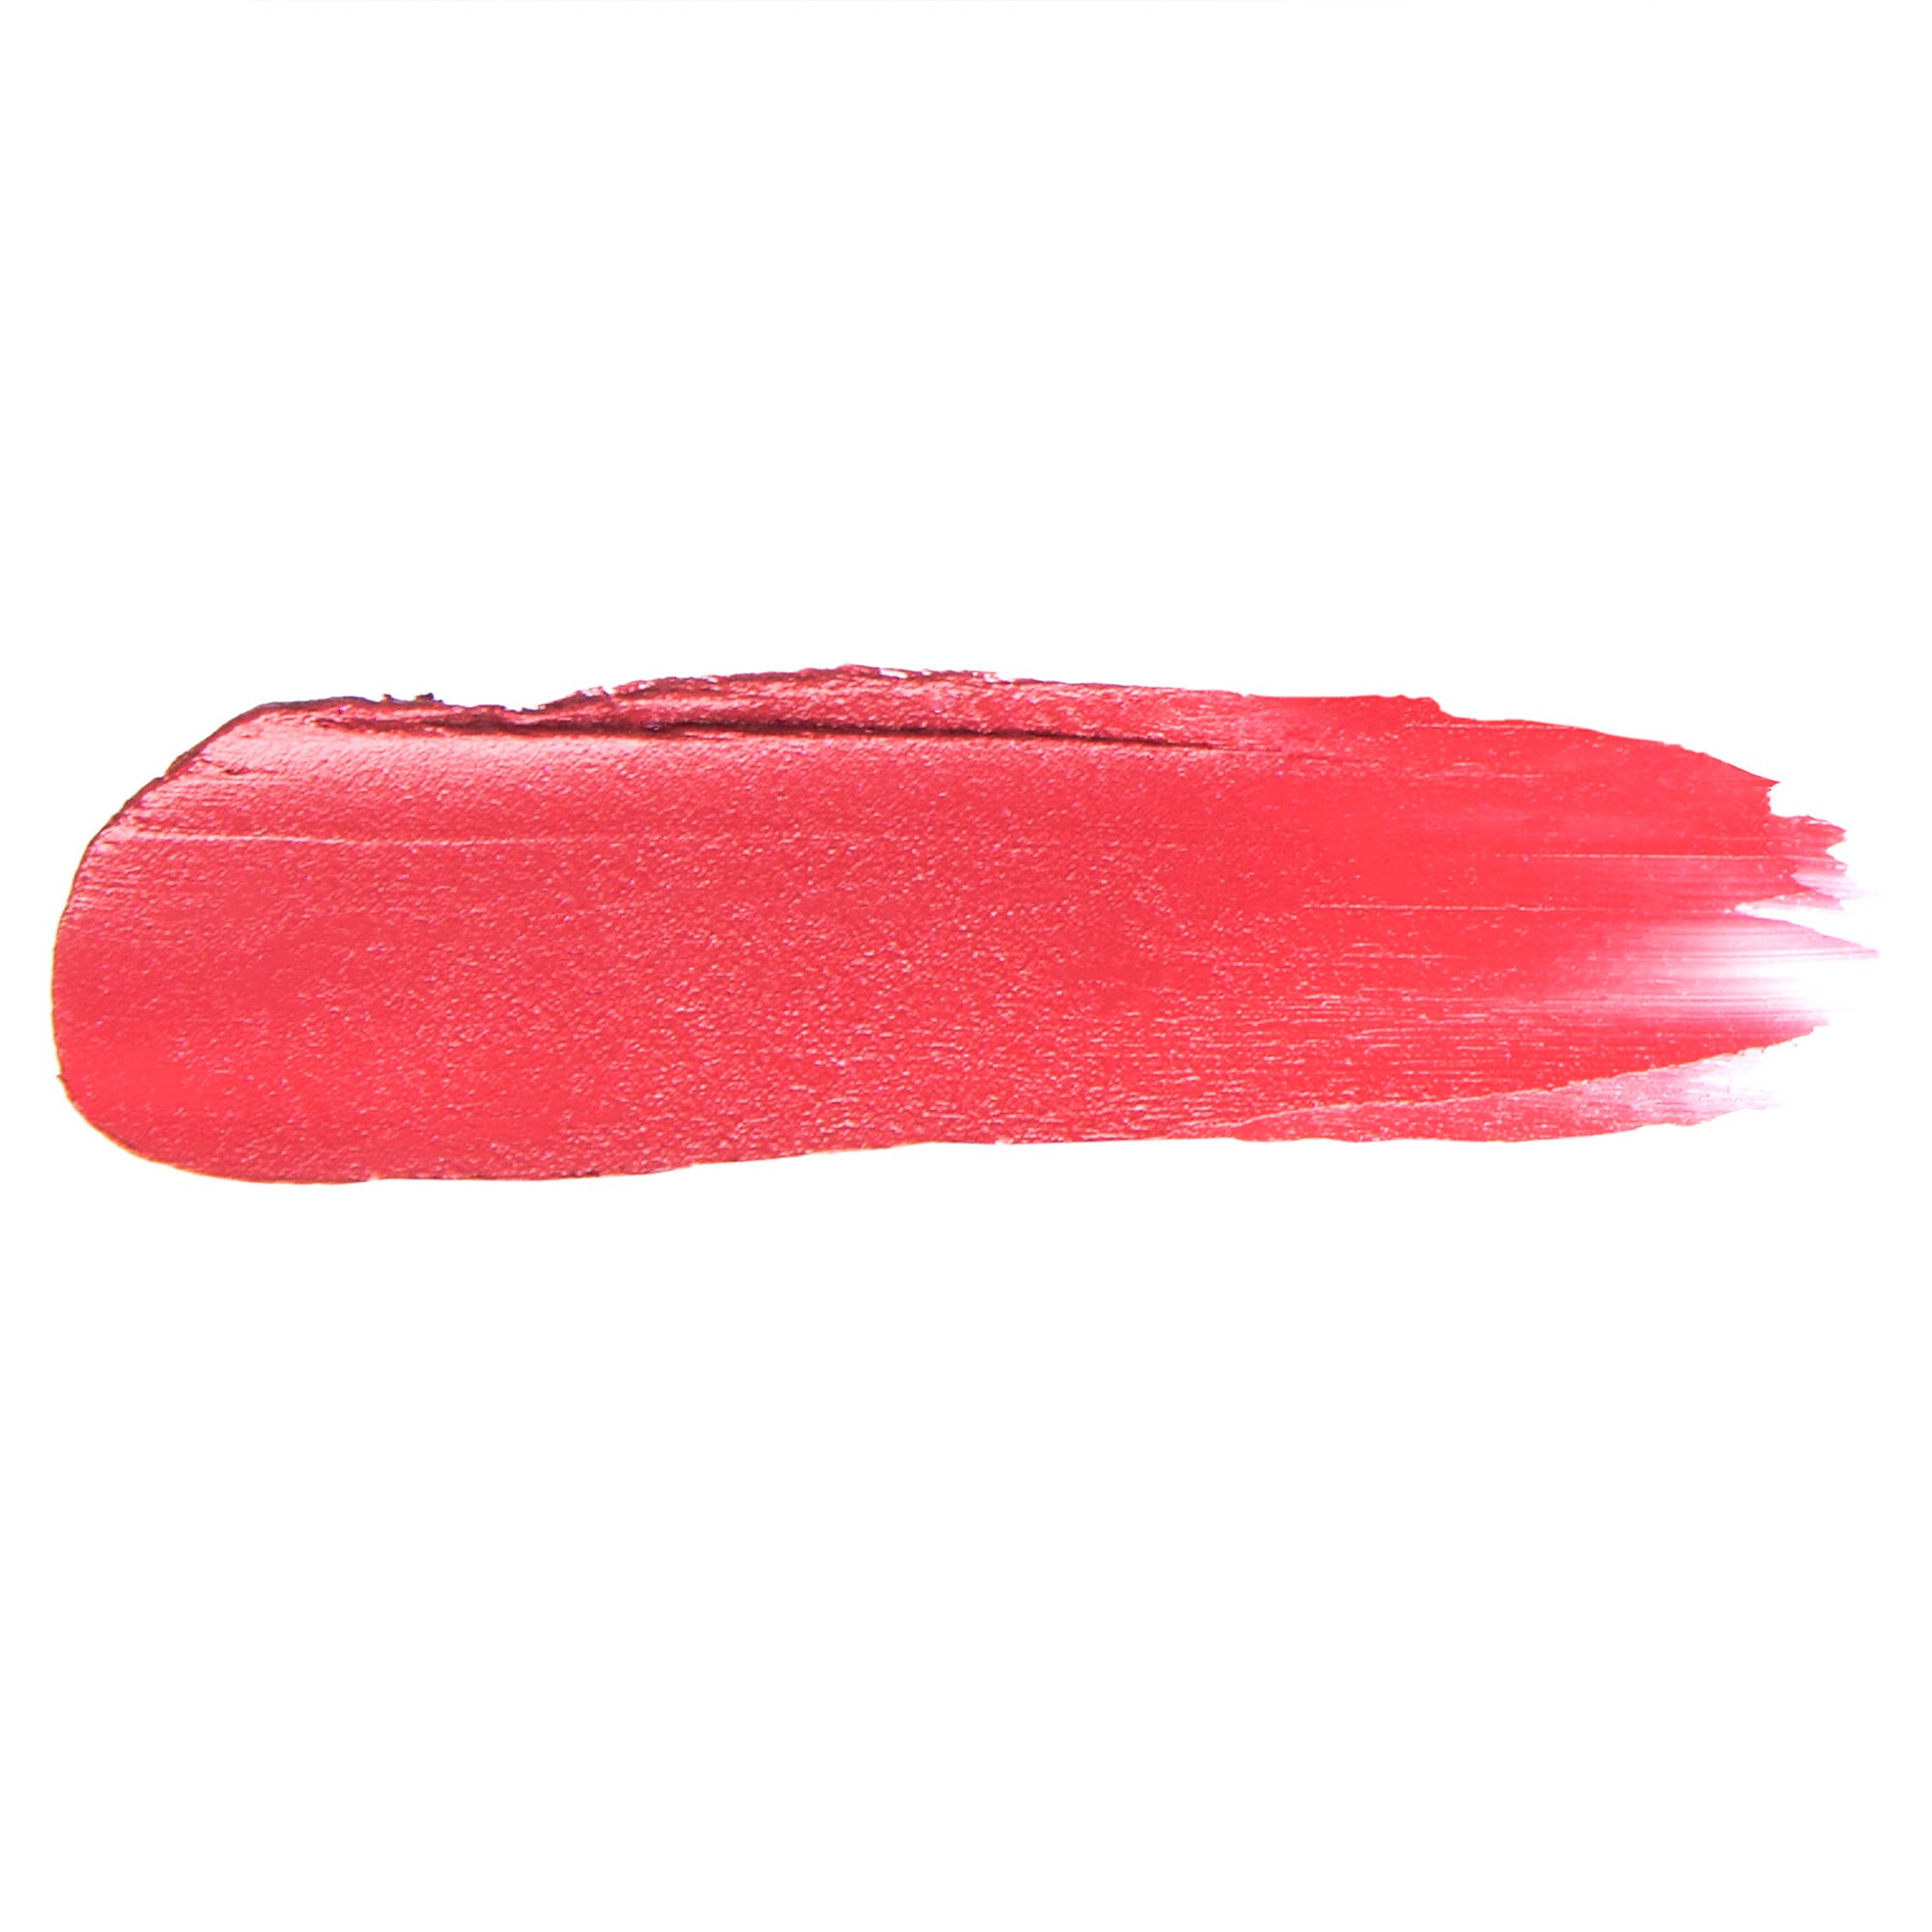 Peter Pan Mermaid Lagoon ''Waterlily Blossom Red'' Lipstick by Bésame